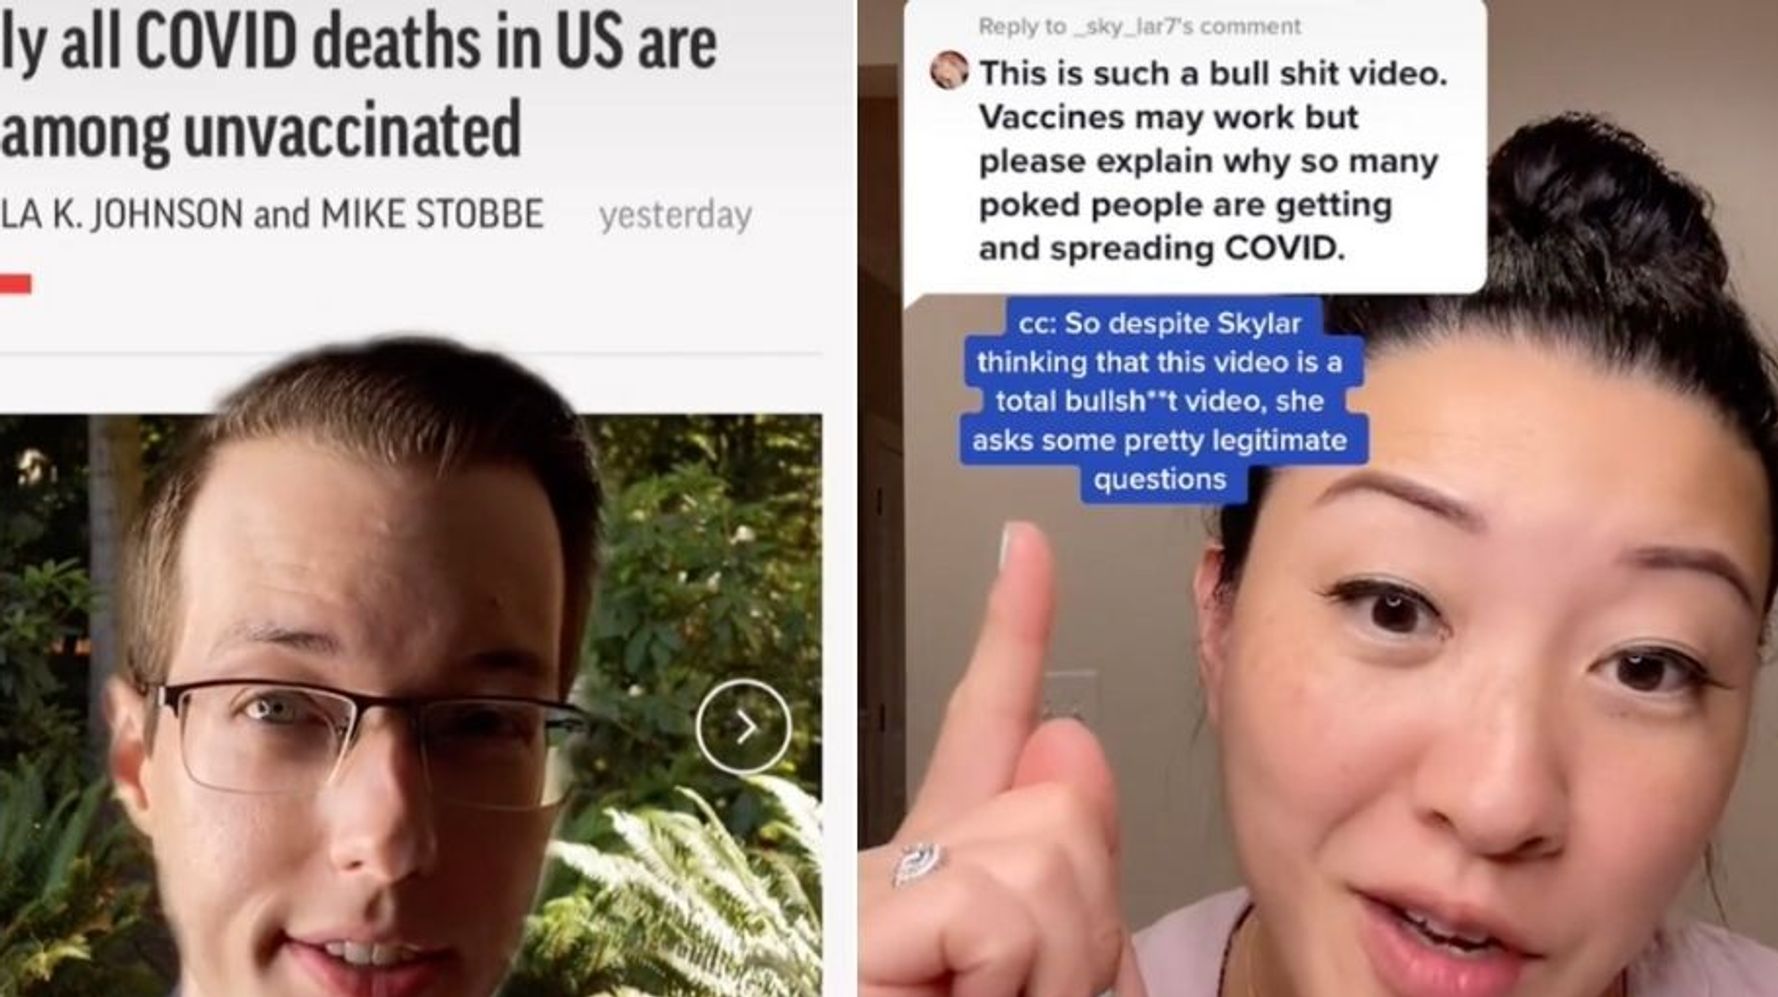 Meet The Medical Experts Debunking COVID Misinformation On TikTok